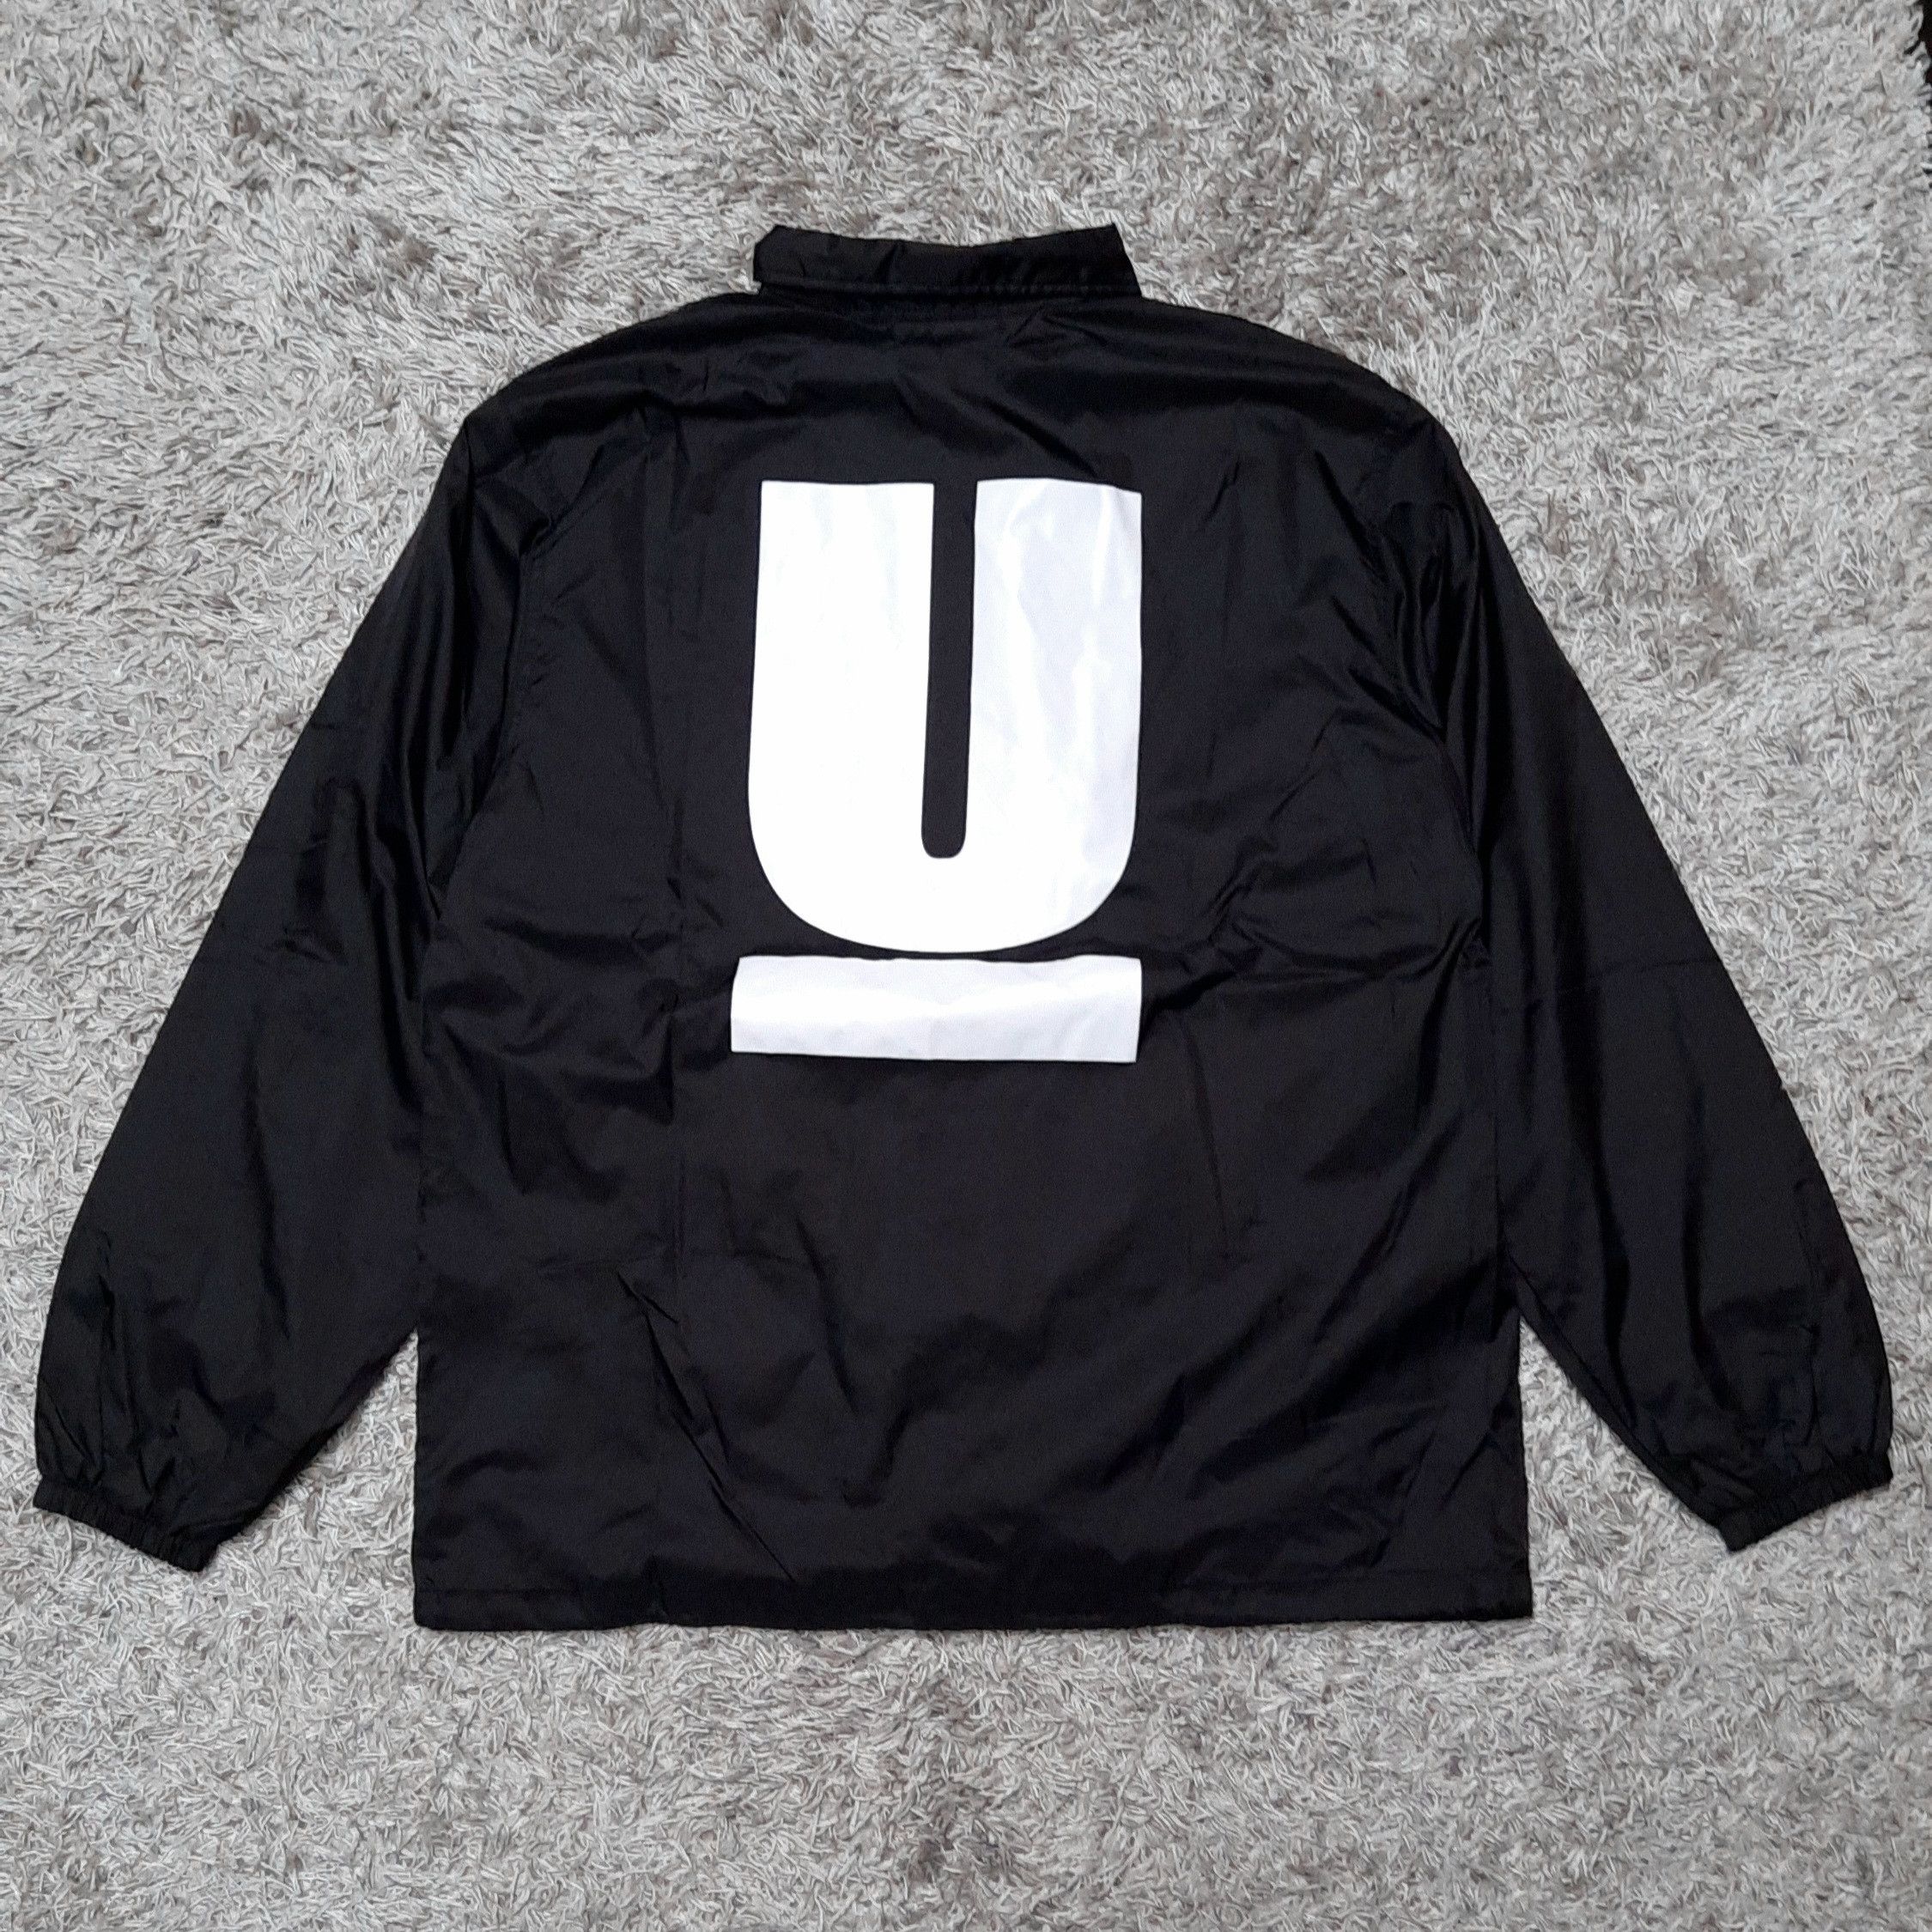 Undercover Undercover Coach Jacket | Grailed